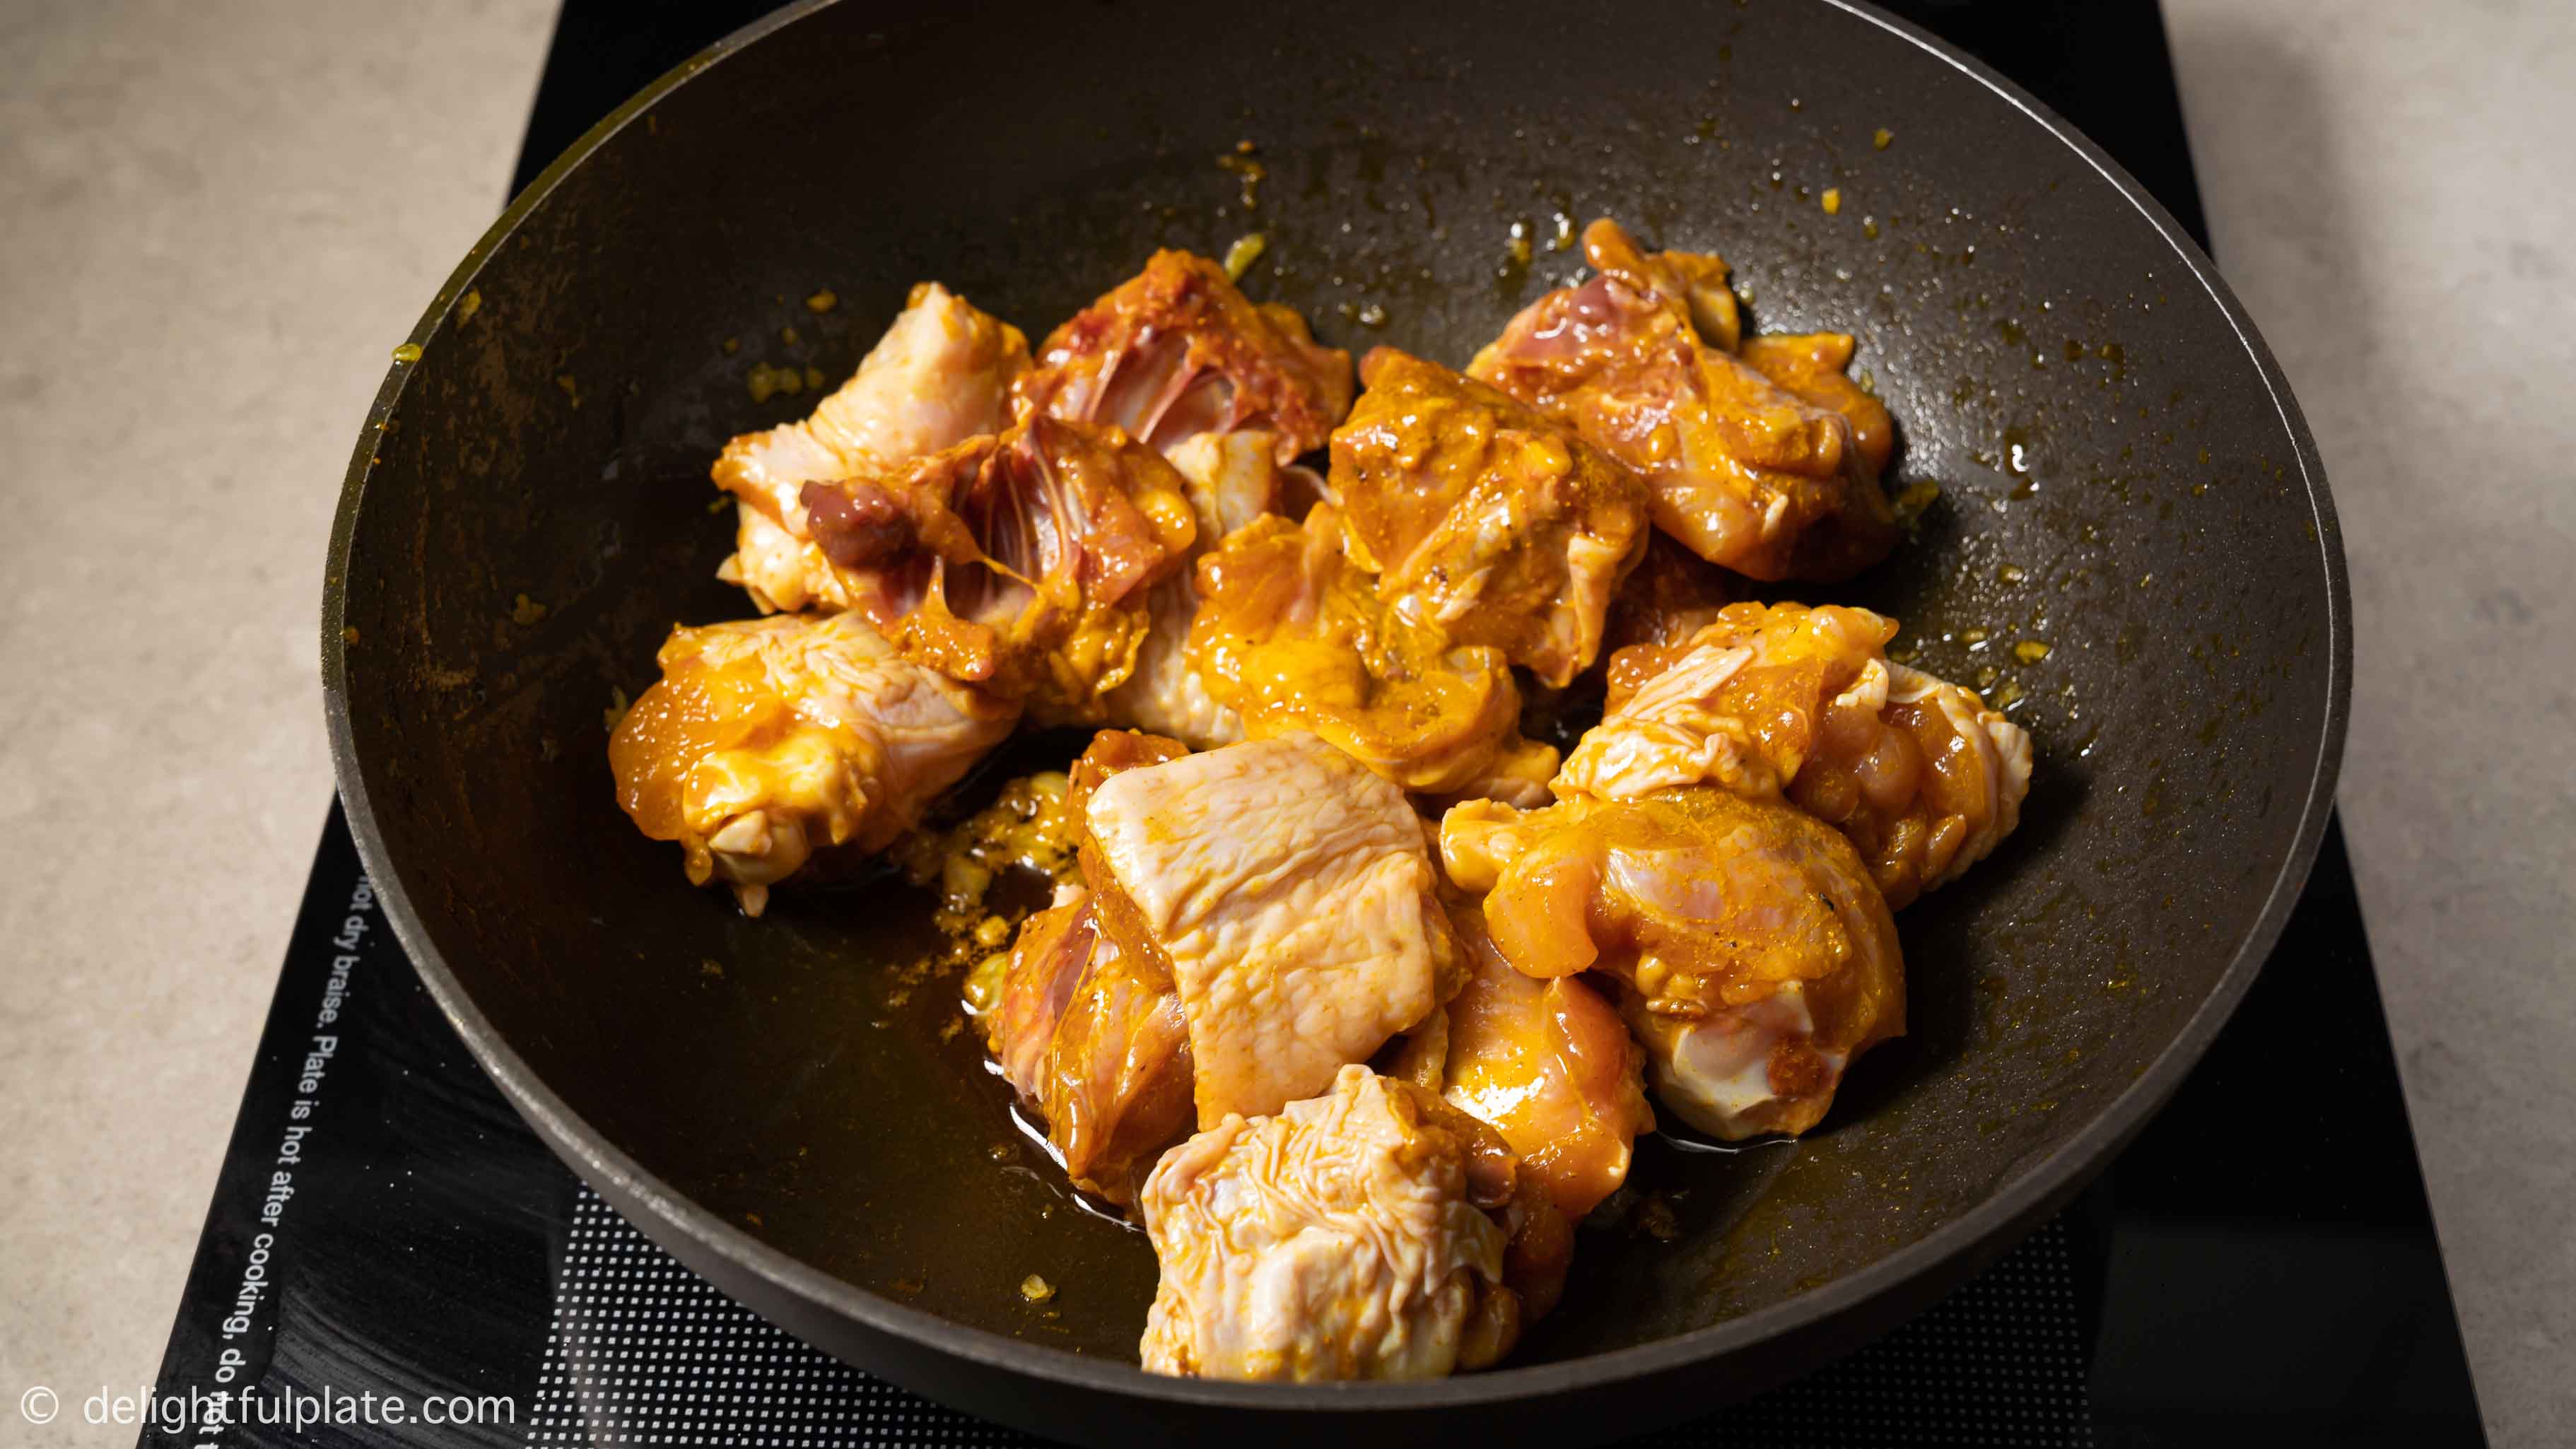 Saute chicken thighs and drumsticks in a skillet